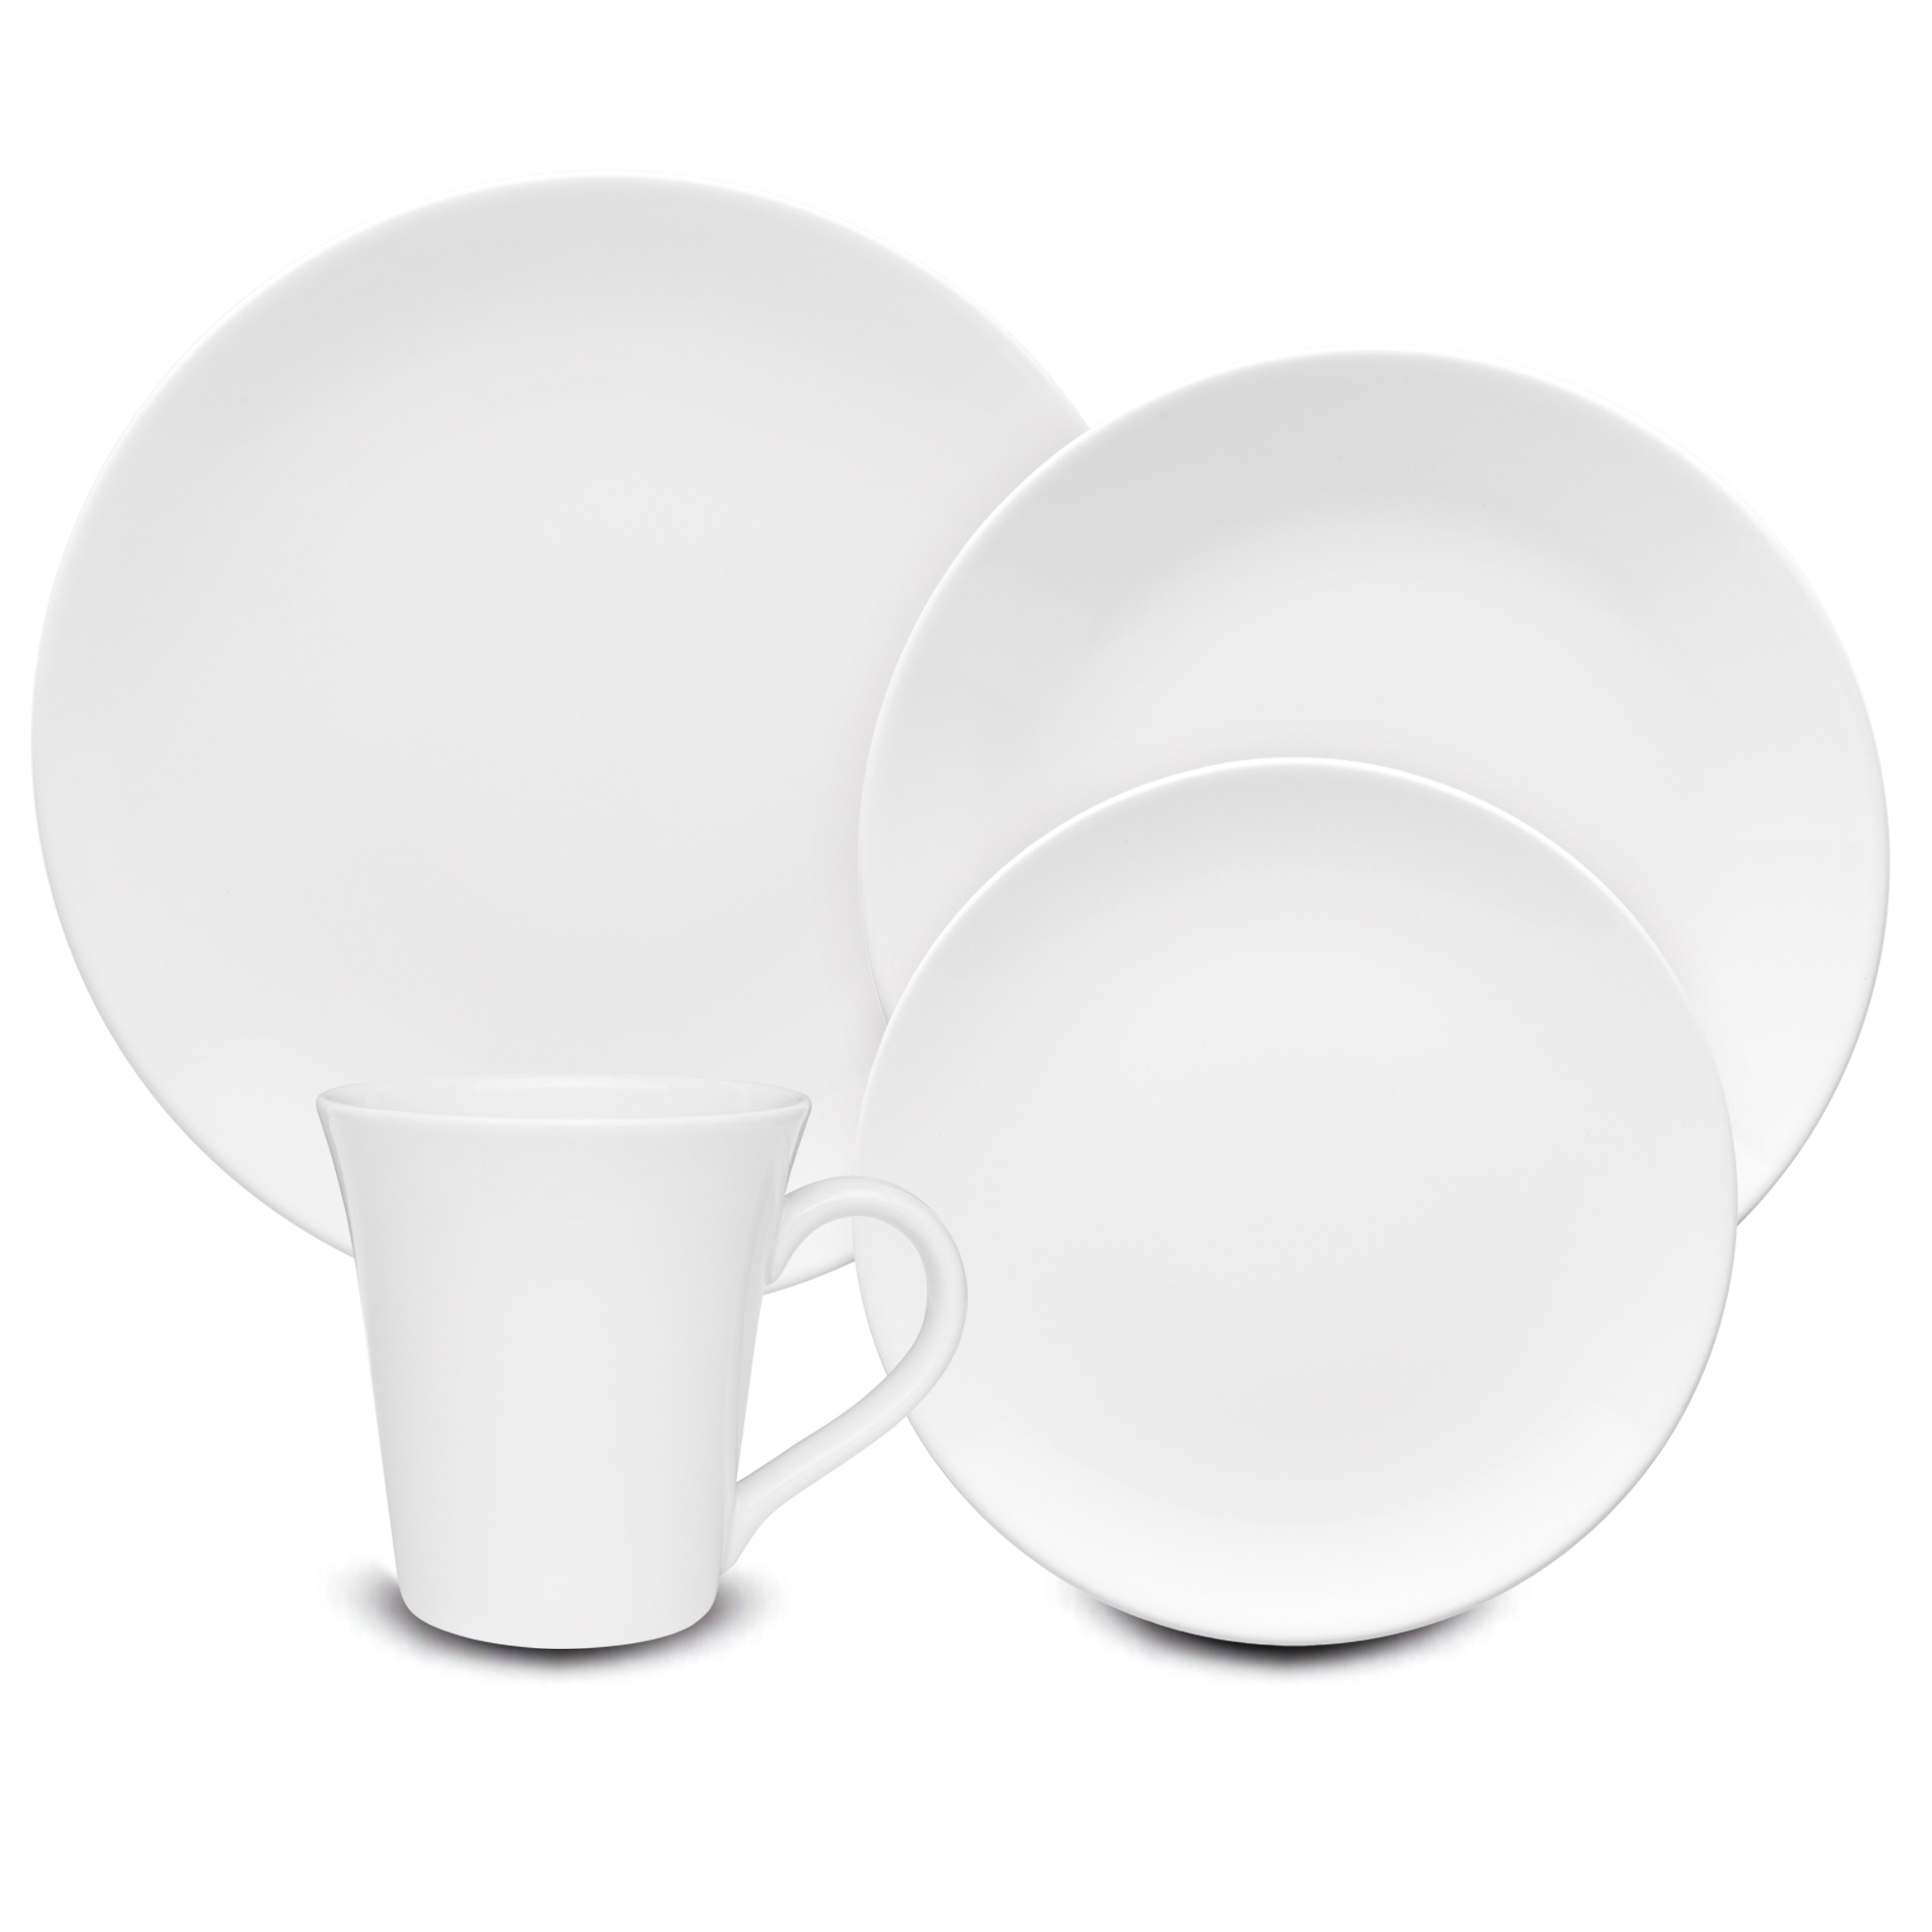 MANHATTAN COMFORT EM17-4812 Coup 16 Piece Dinner Set, Service for 4 in White